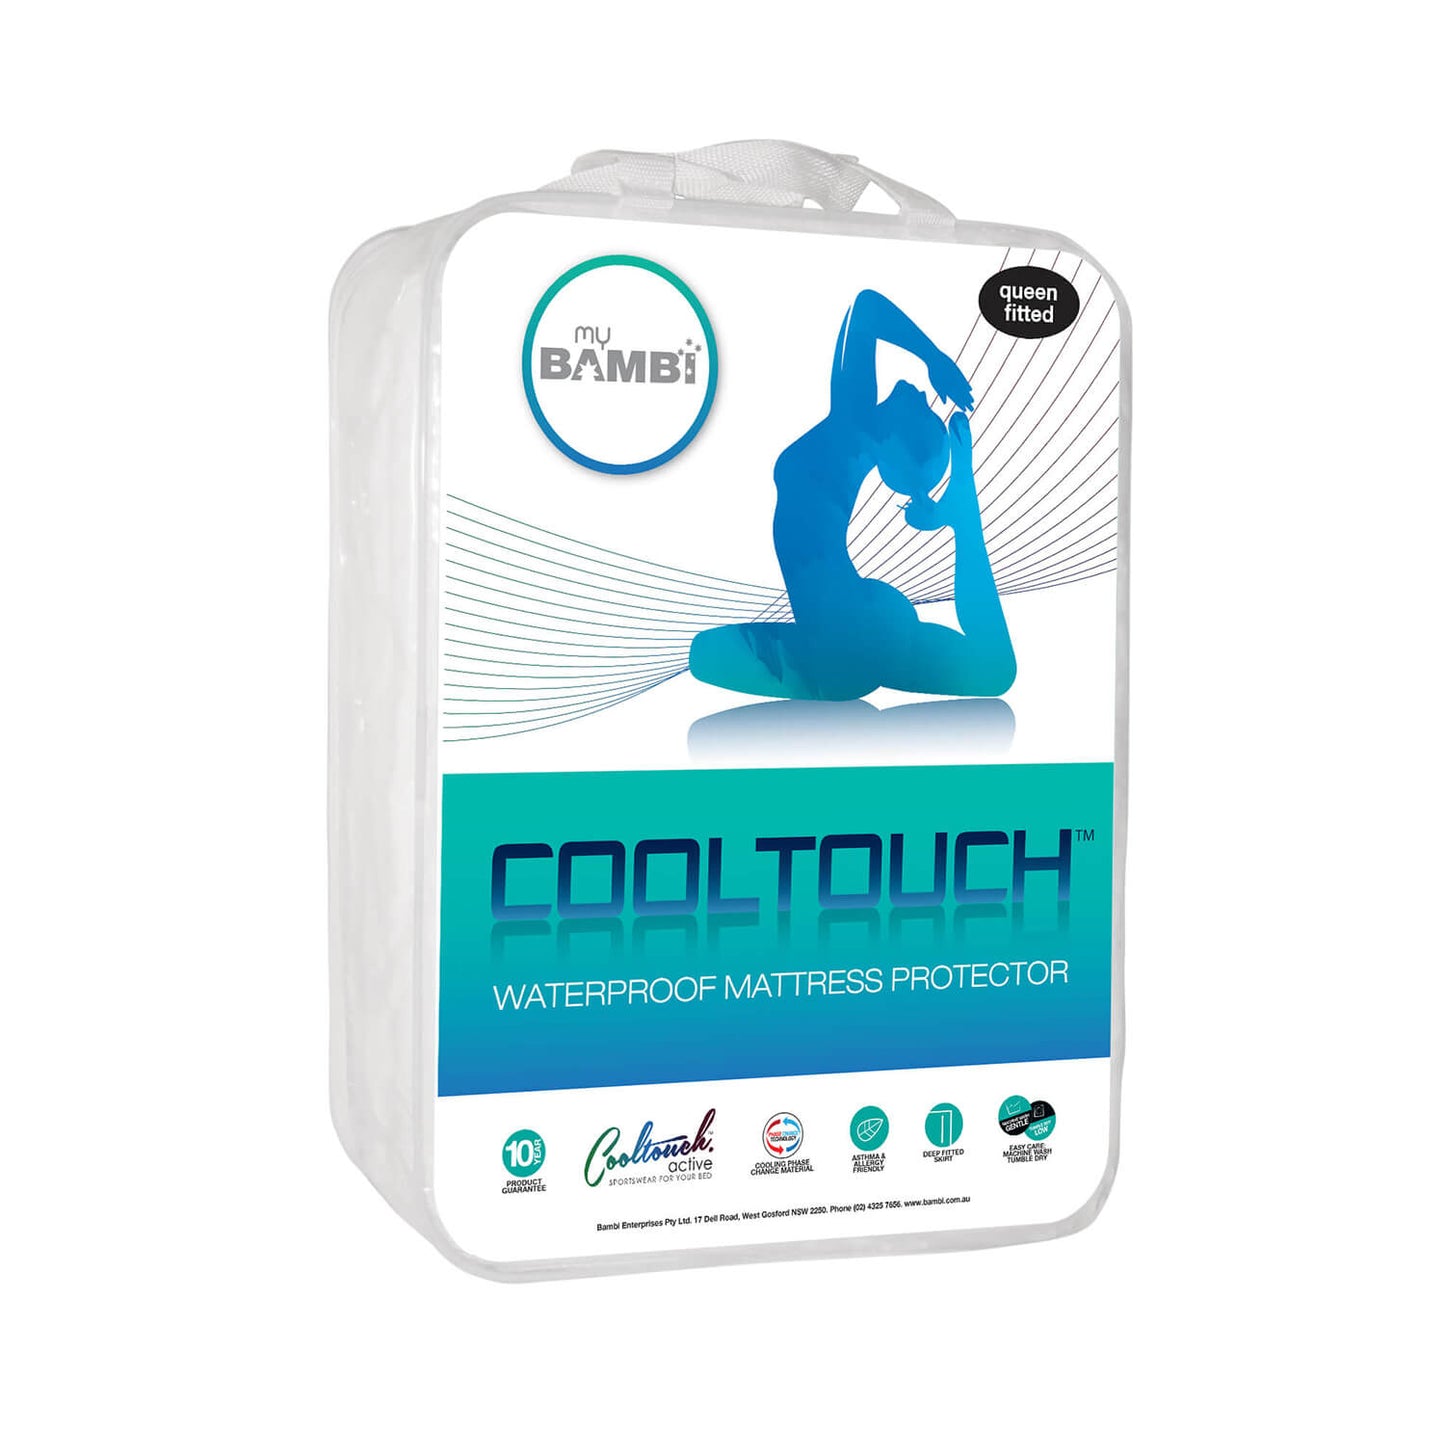 Cooltouch Active Waterproof Mattress Protector by Bambi